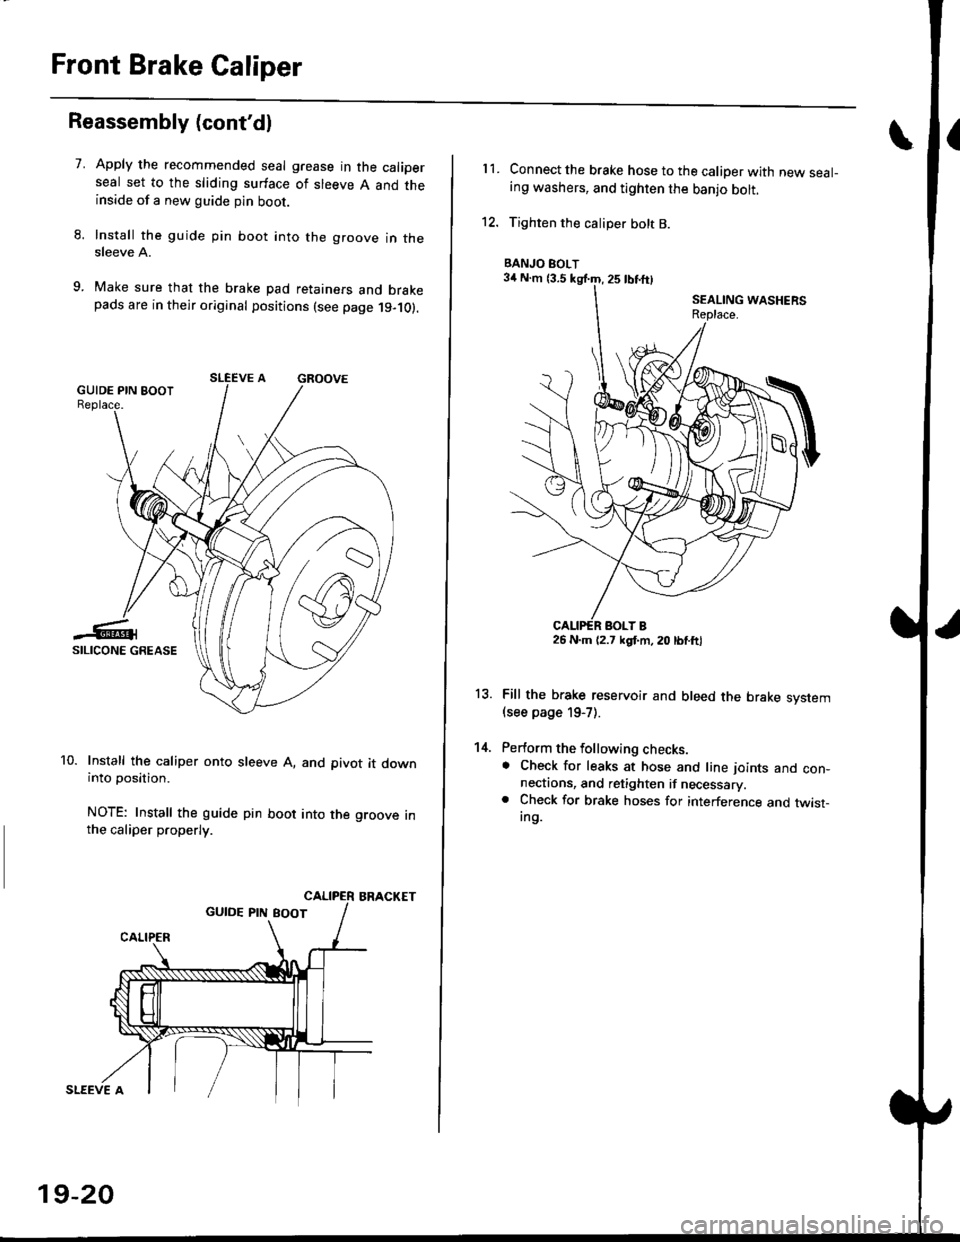 HONDA CIVIC 1997 6.G User Guide Front Brake Caliper
Reassembly (contdl
7.Apply the recommended seal grease in the caliperseal set to the sliding surface of sleeve A and theinside of a new guide pin boot.
Install the guide pin boot 